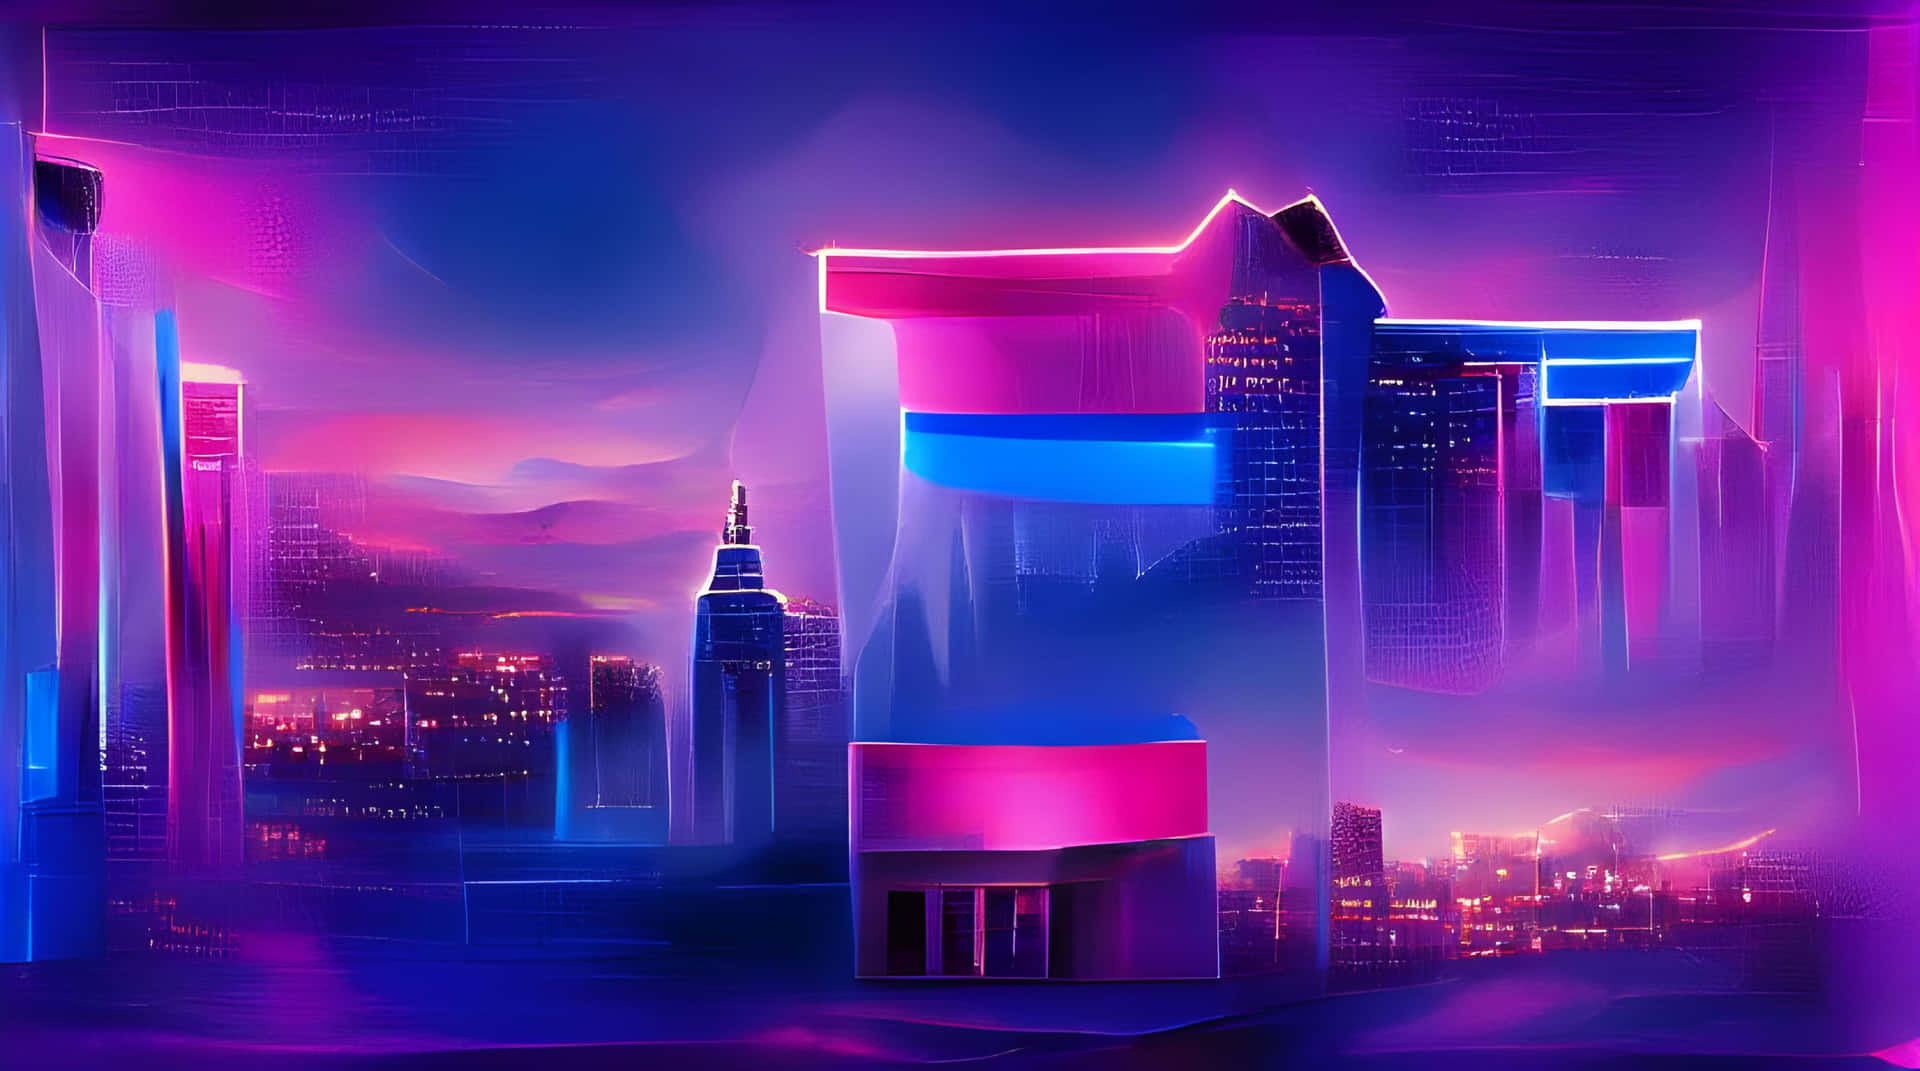 Step into the future with Synthwave City! Wallpaper